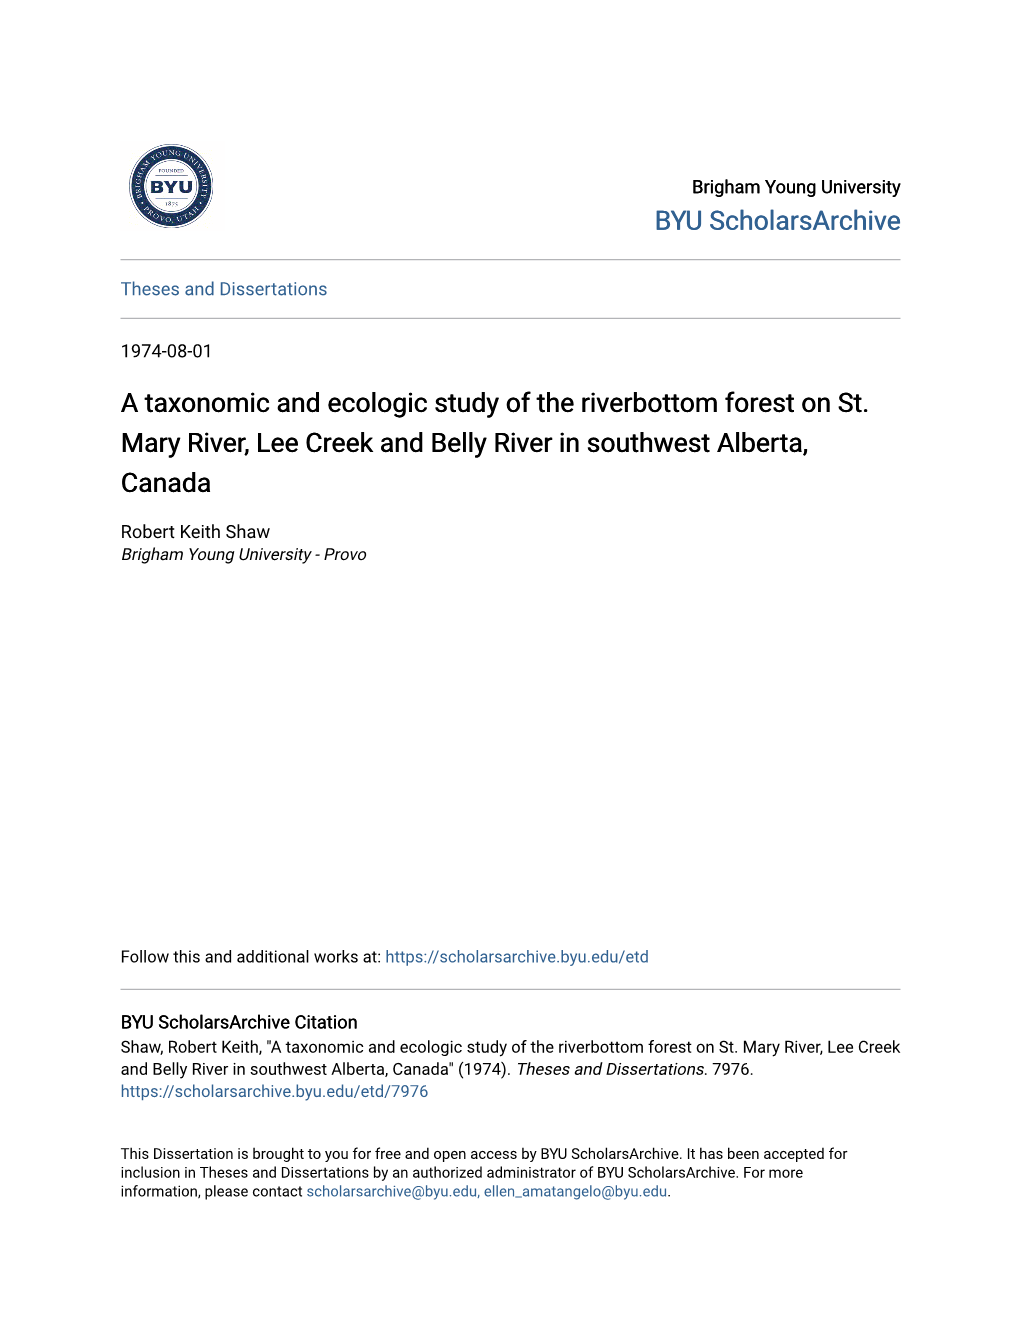 A Taxonomic and Ecologic Study of the Riverbottom Forest on St. Mary River, Lee Creek and Belly River in Southwest Alberta, Canada